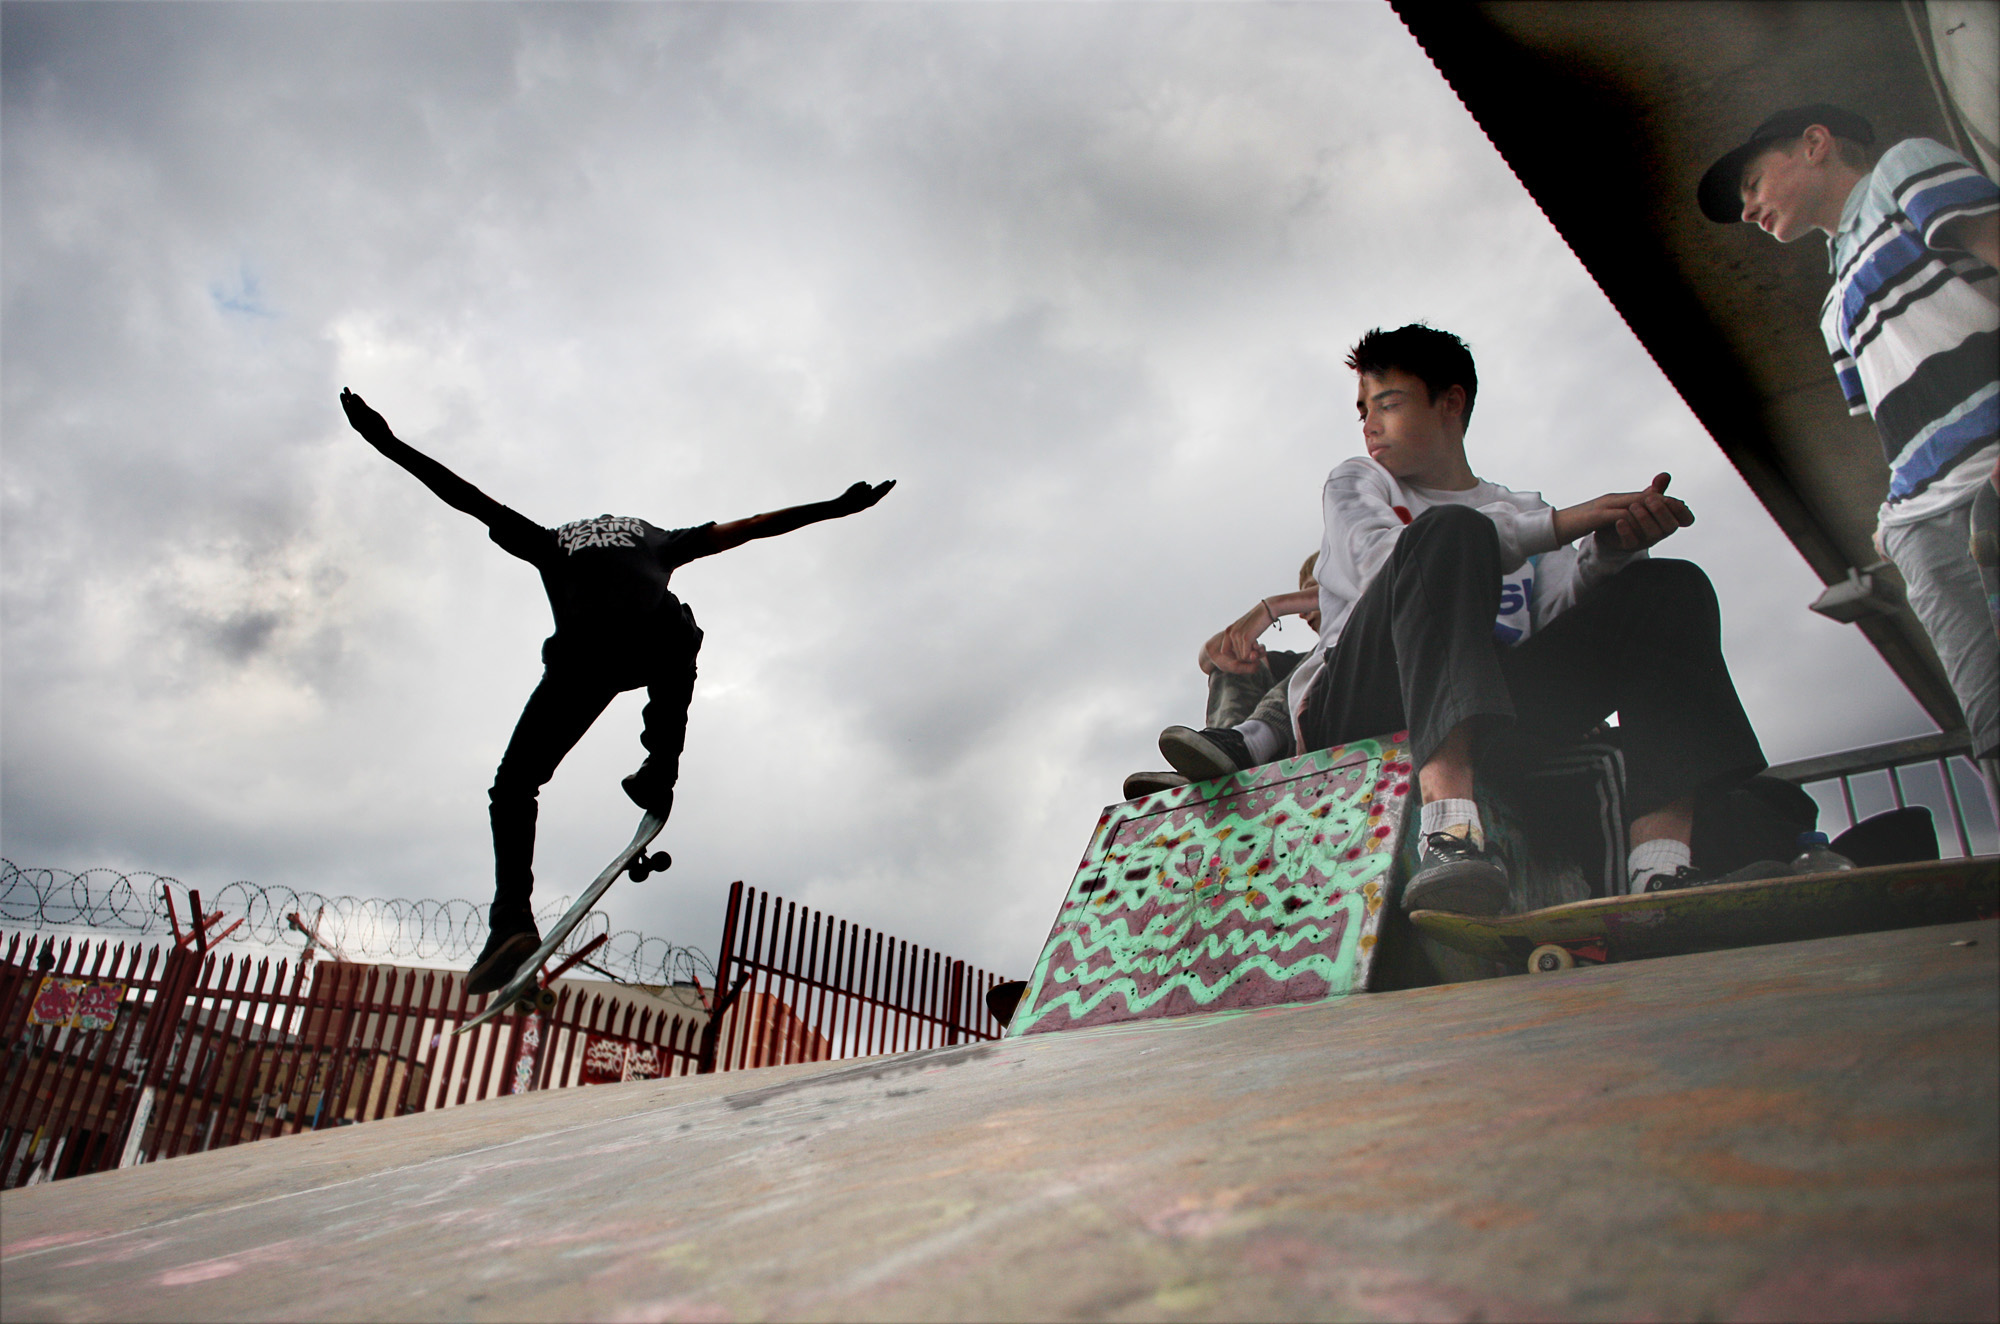 Flying under the flyover – skater boys hanging out in Little Patrick Street skate park underneath the M3